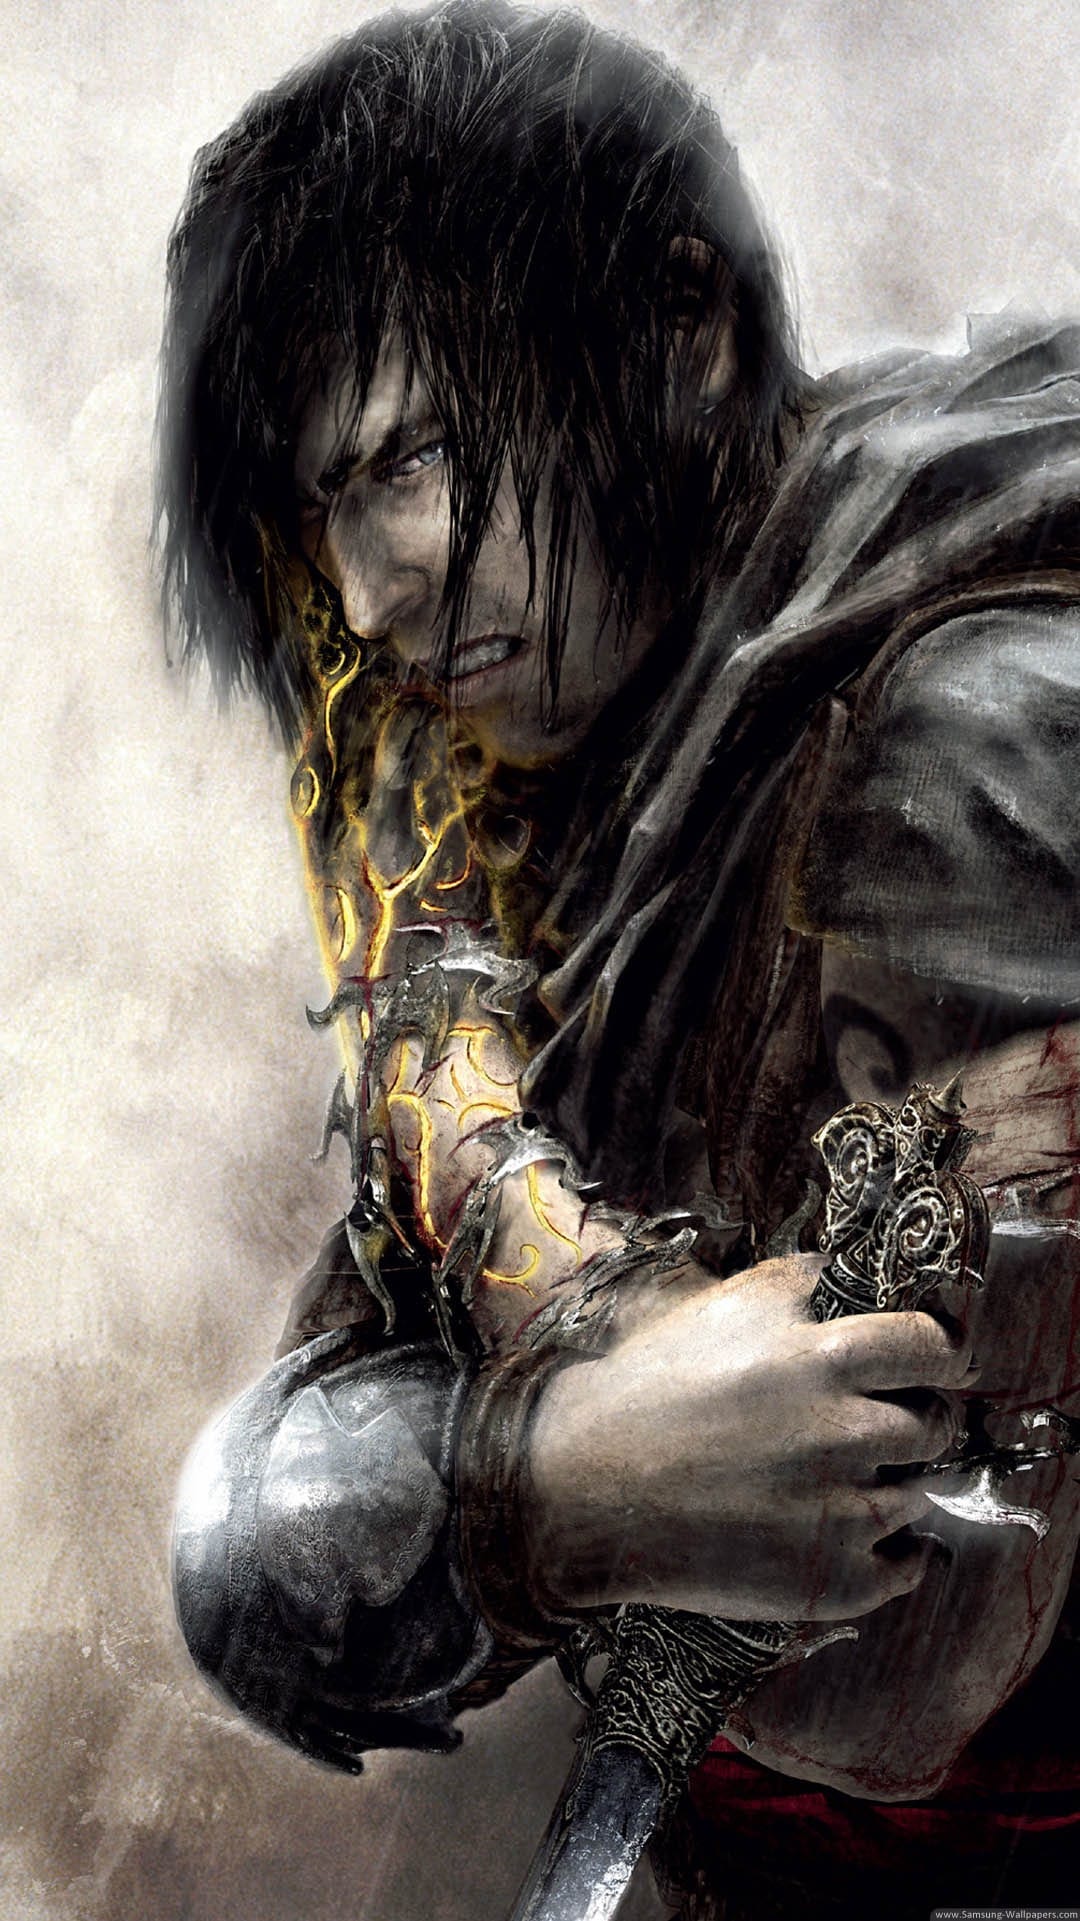 Prince Of Persia The Two Thrones - 1080x1921 Wallpaper 